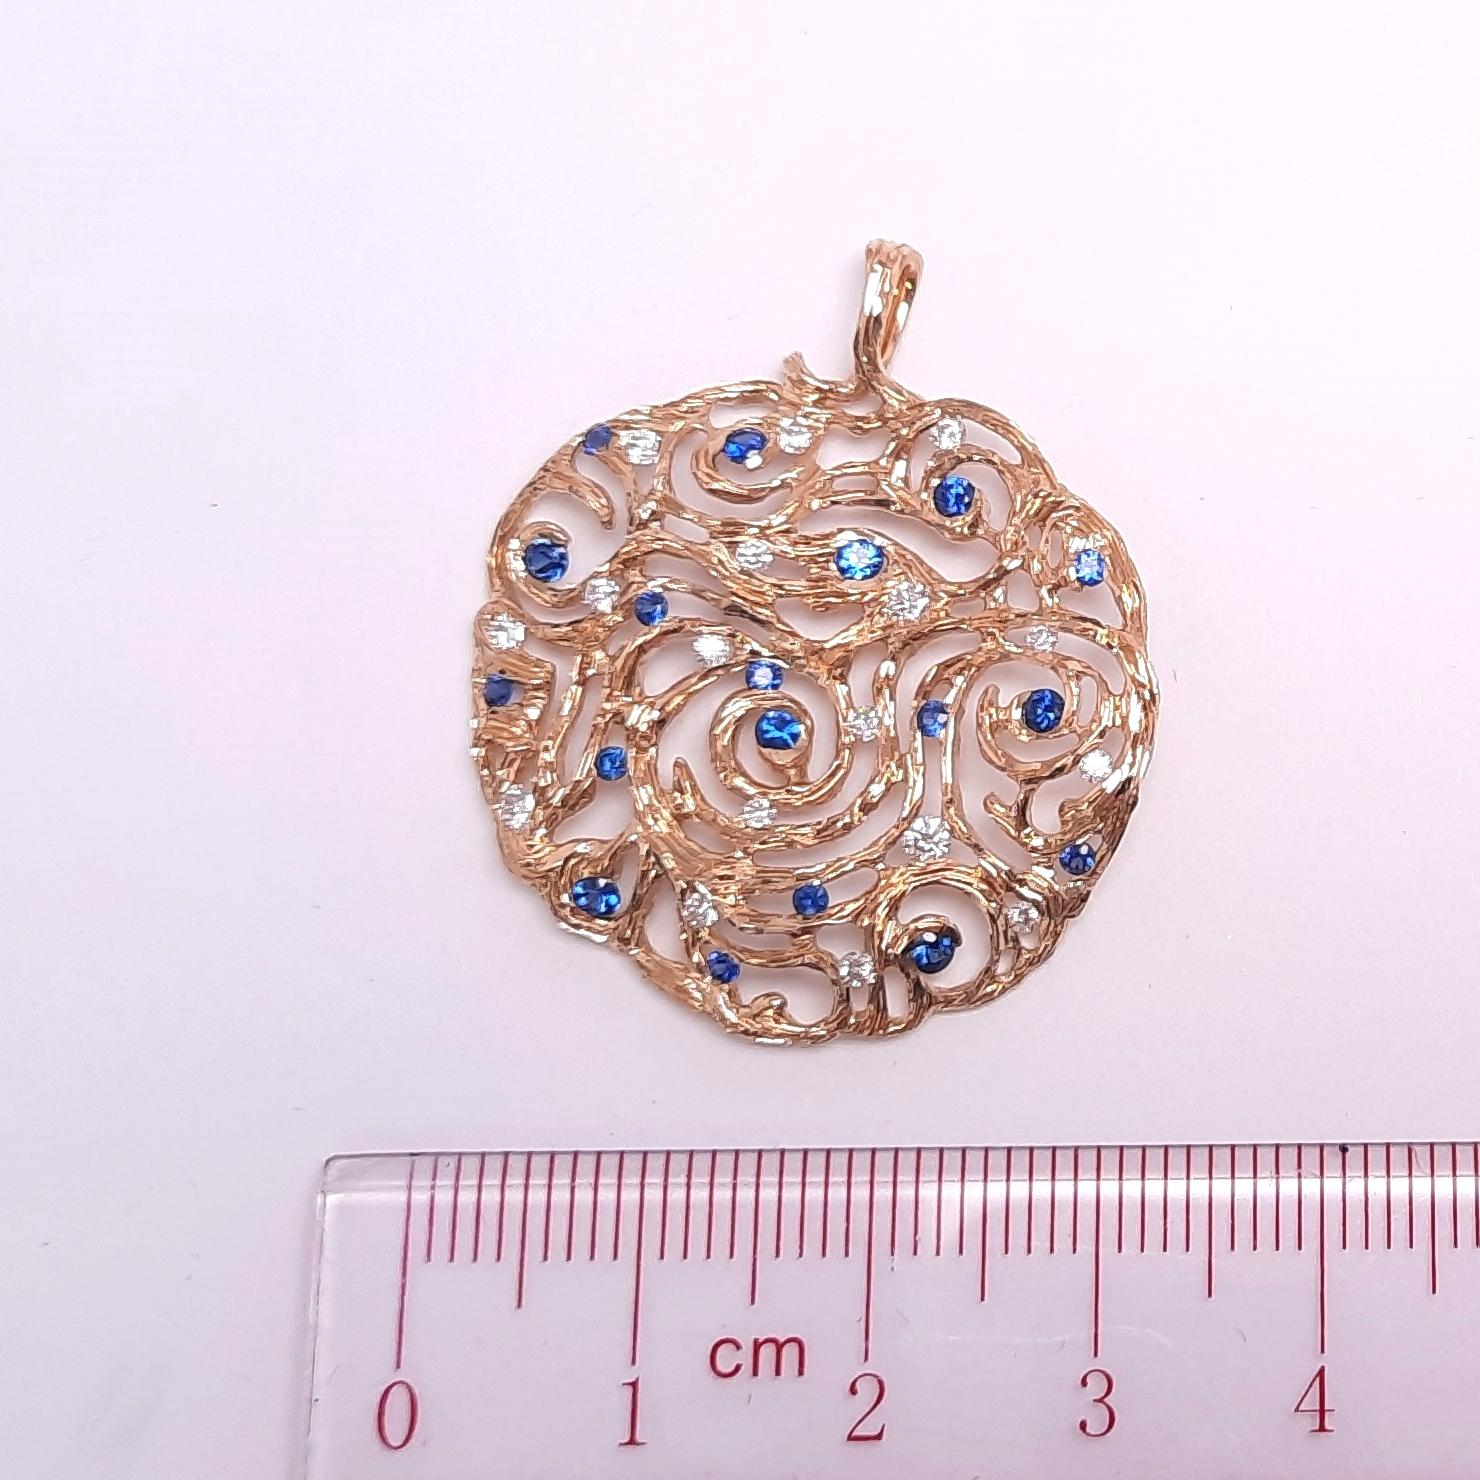 Golden Swirling Clouds holding diamonds and sapphire stars on the refine gold filigree fascinate you and make you look more fashionable and individual. 

Dazzling diamonds and round cut blue sapphires are embedded on the handmade golden filigree